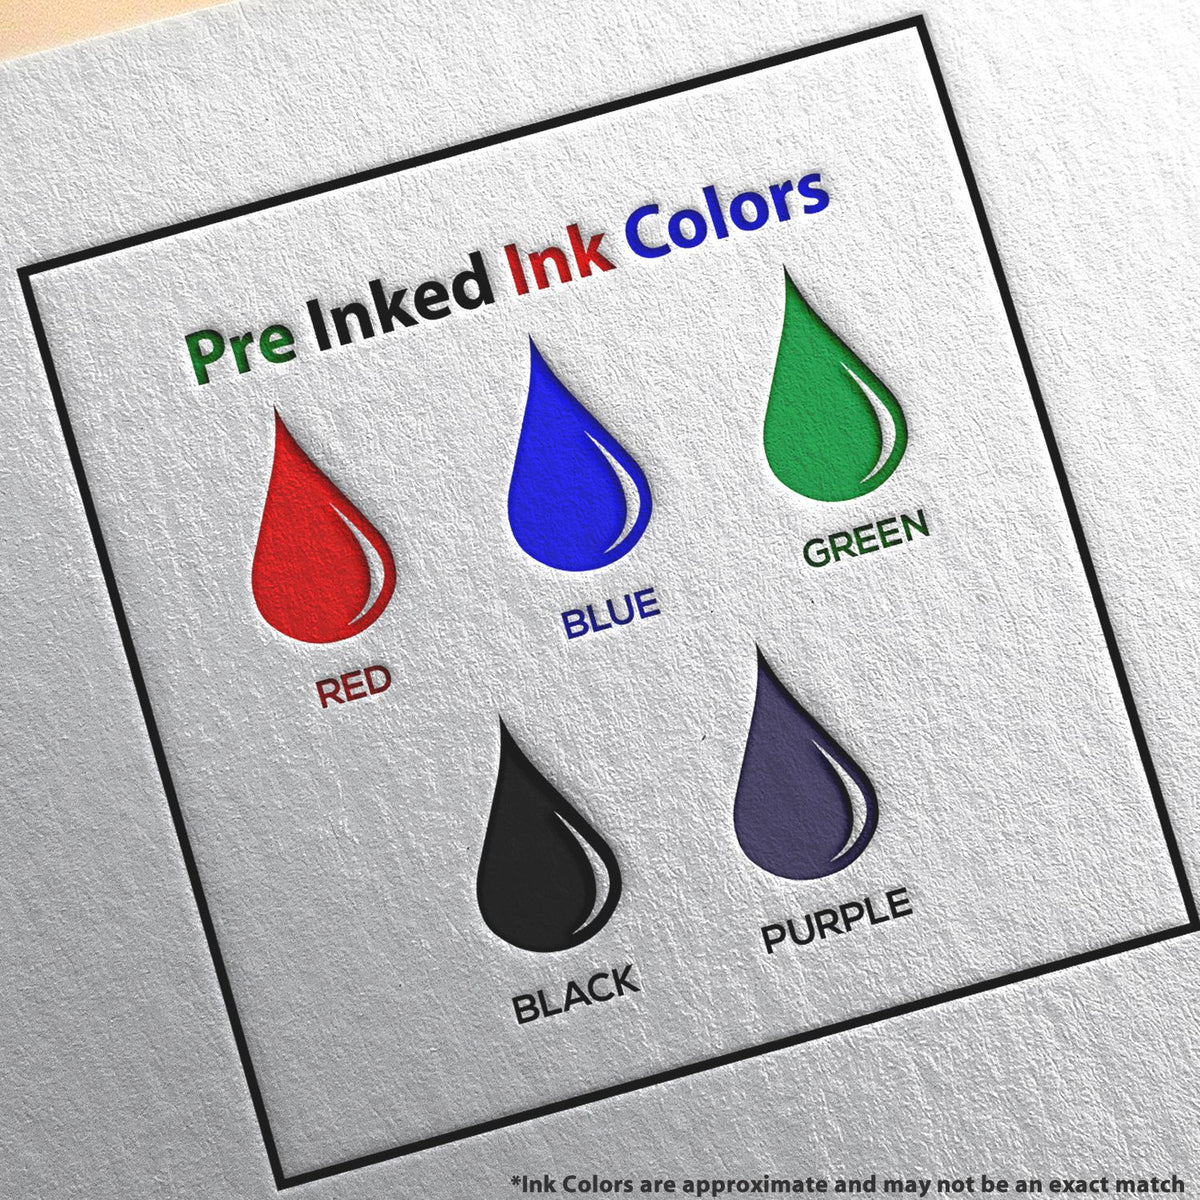 A picture showing the different ink colors or hues available for the Super Slim Rhode Island Notary Public Stamp product.